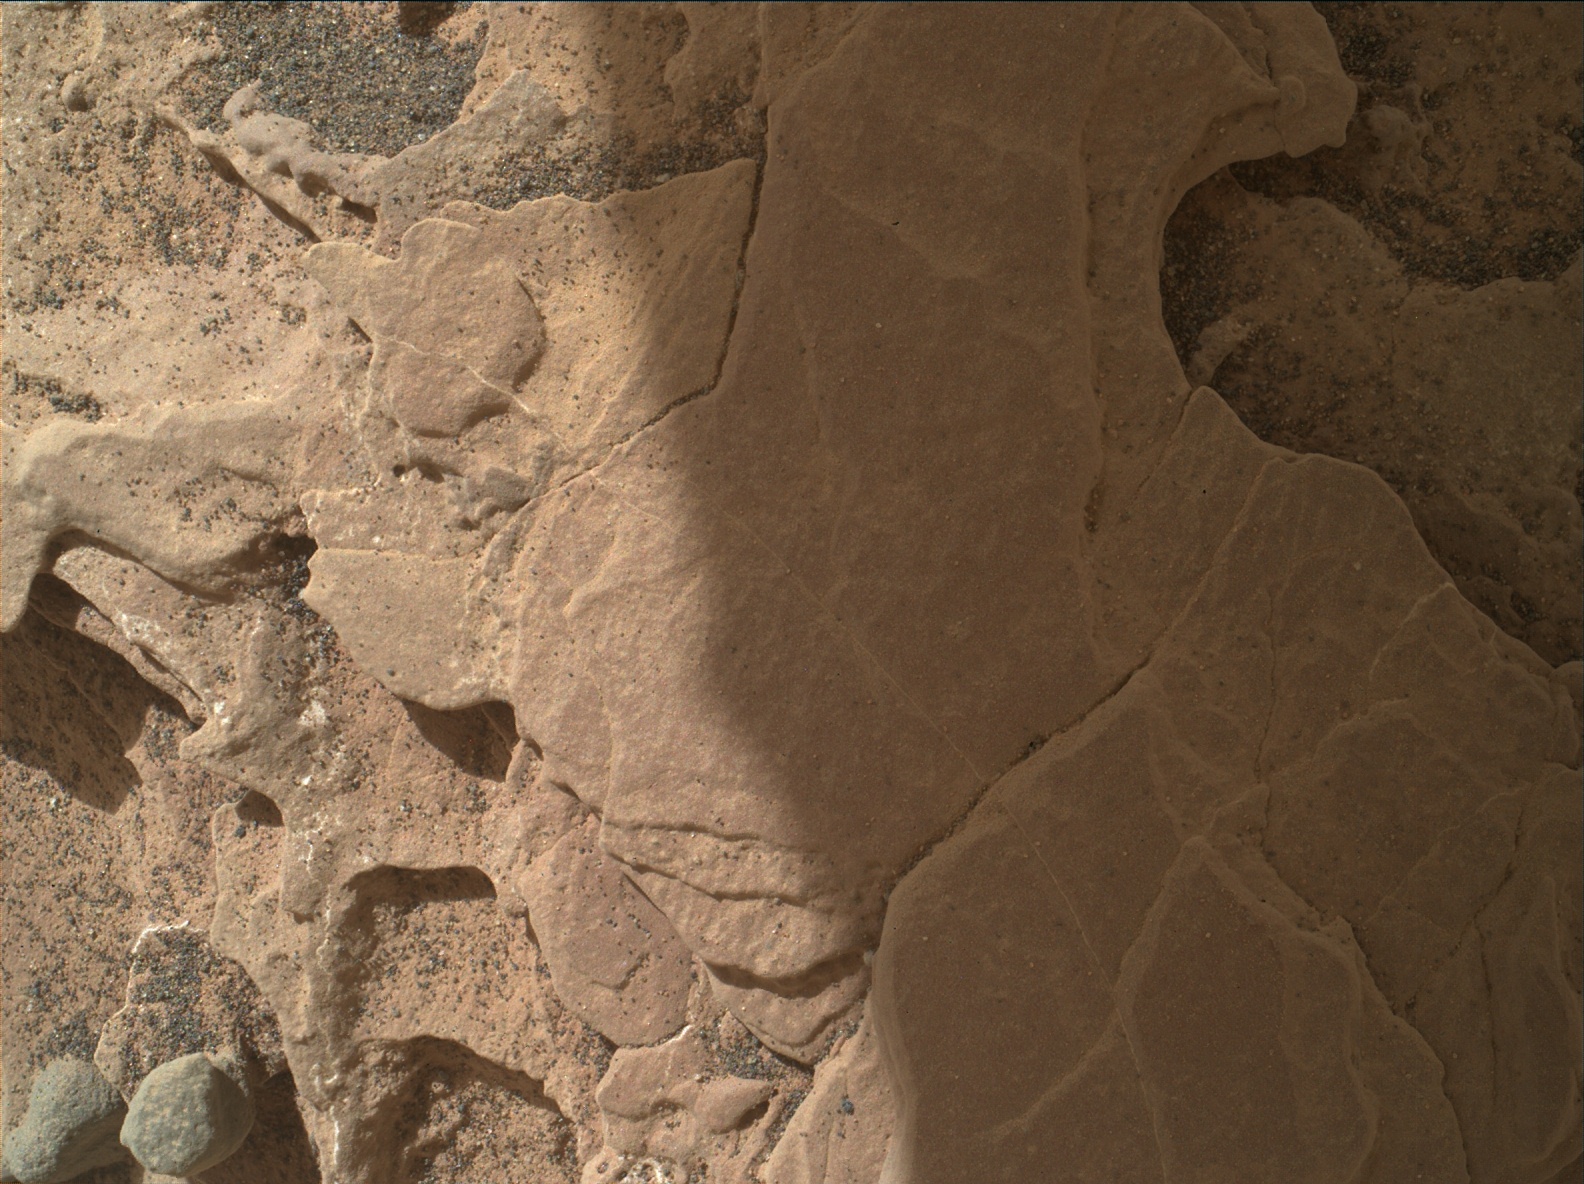 Nasa's Mars rover Curiosity acquired this image using its Mars Hand Lens Imager (MAHLI) on Sol 1745